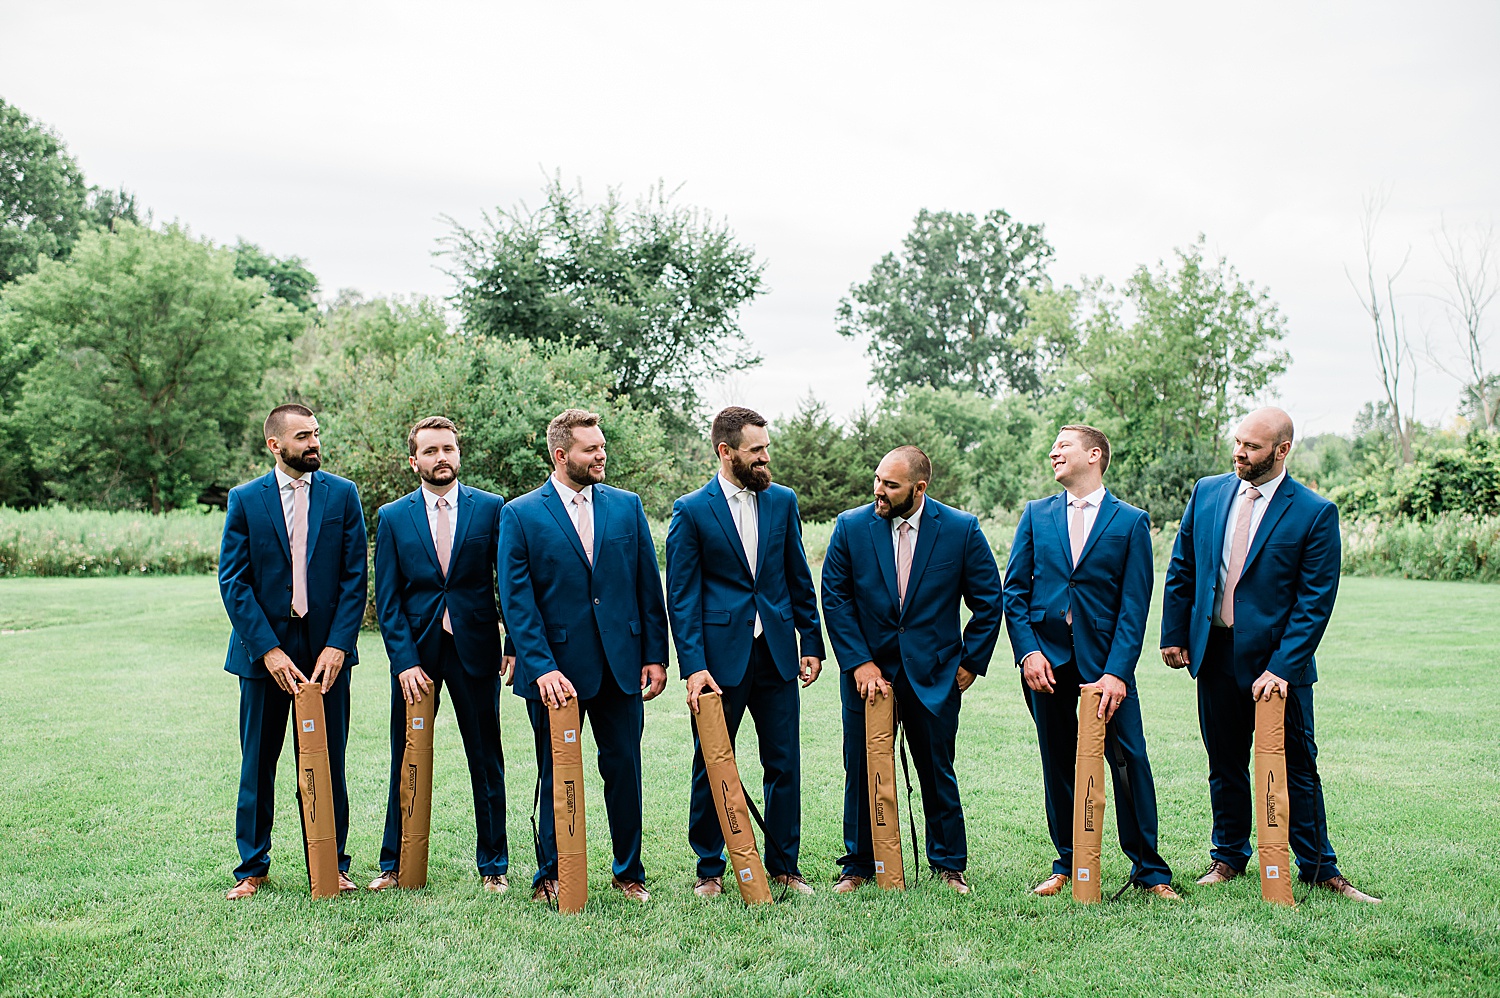 Groomsman holding wedding gifts from bride and groom wearing navy blue suits